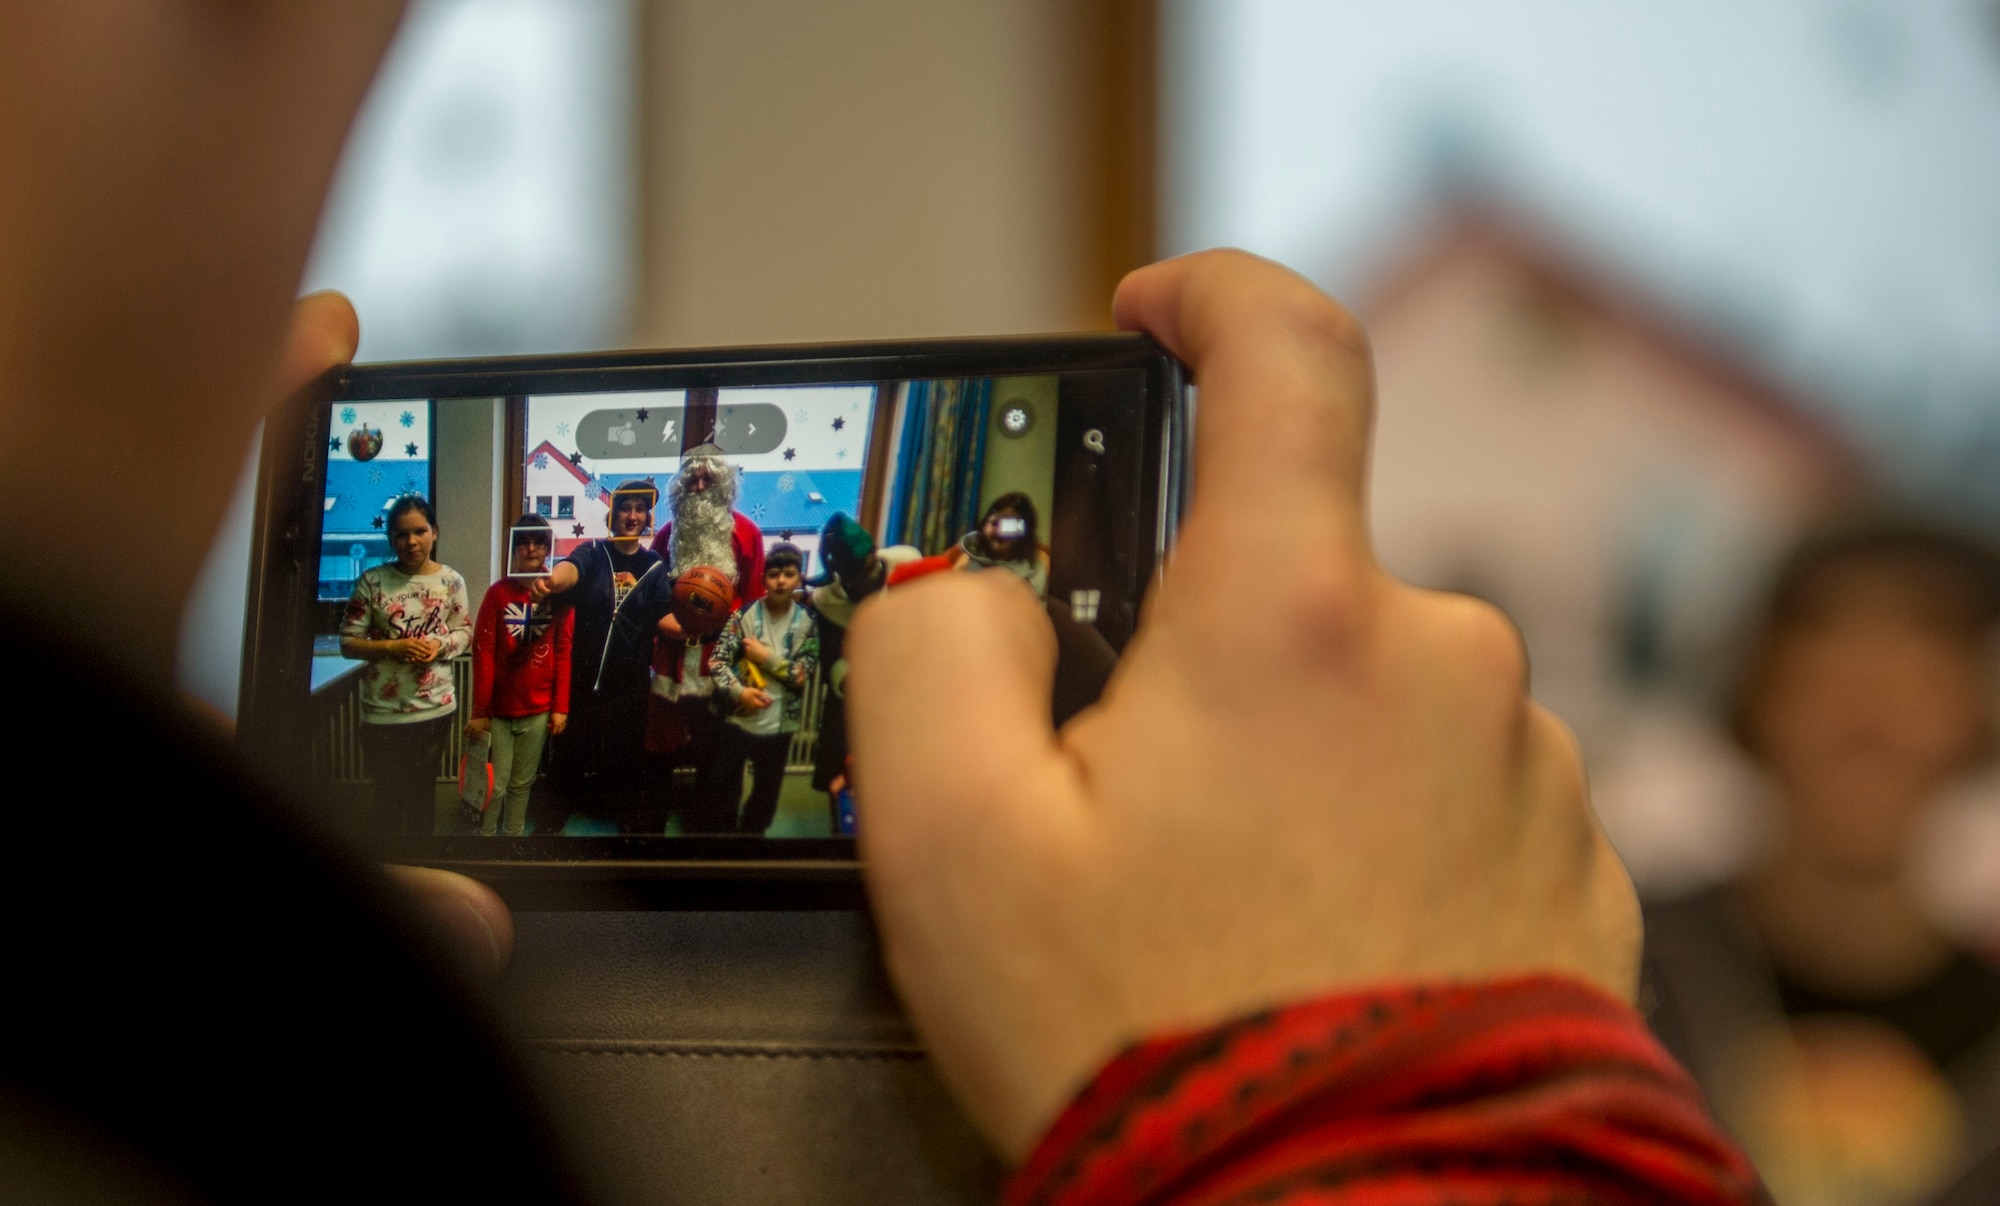 Dr. Alexander Knauff, University of Trier professor of social work and sciences and St. Vinzenzhaus caretaker, takes a photo of the institution’s residents with Santa Claus during a holiday party at the institution of child and youth services in Speicher, Germany, Dec. 13, 2015. Spangdahlem Air Base’s First Four group visited the institution to throw a holiday party. (U.S. Air Force photo by Airman 1st Class Timothy Kim/Released)